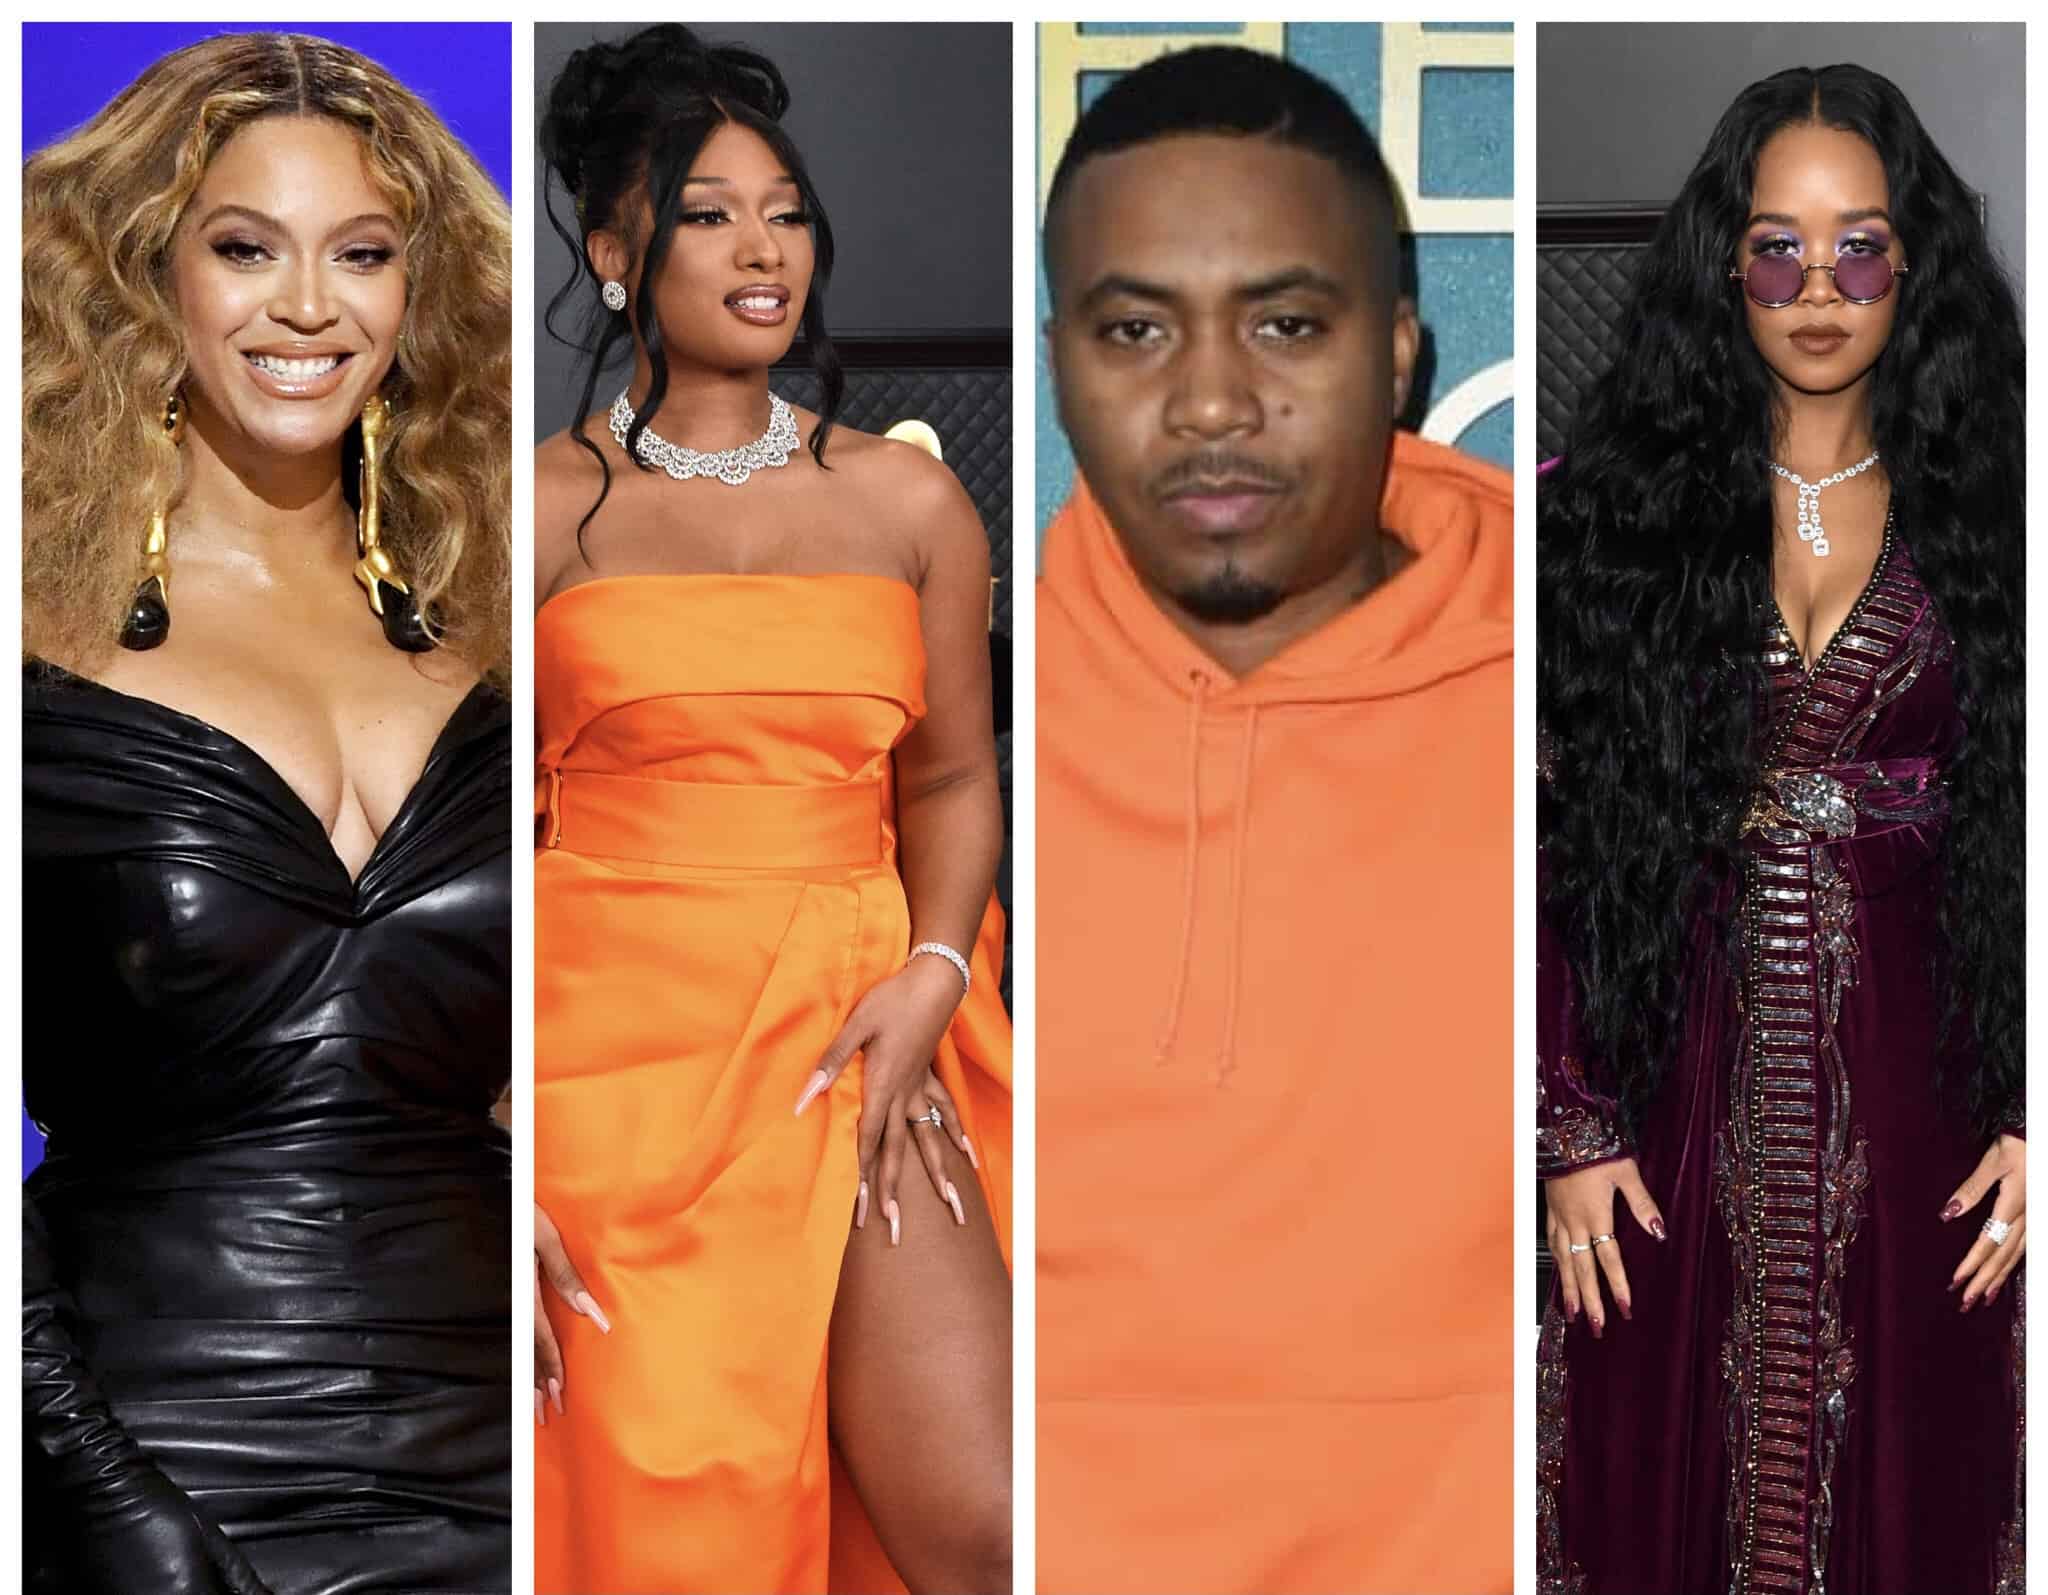 Beyoncé, Megan Thee Stallion, Nas & H.E.R. Were The Big Winners Of The Night At The 63rd Grammy Awards!